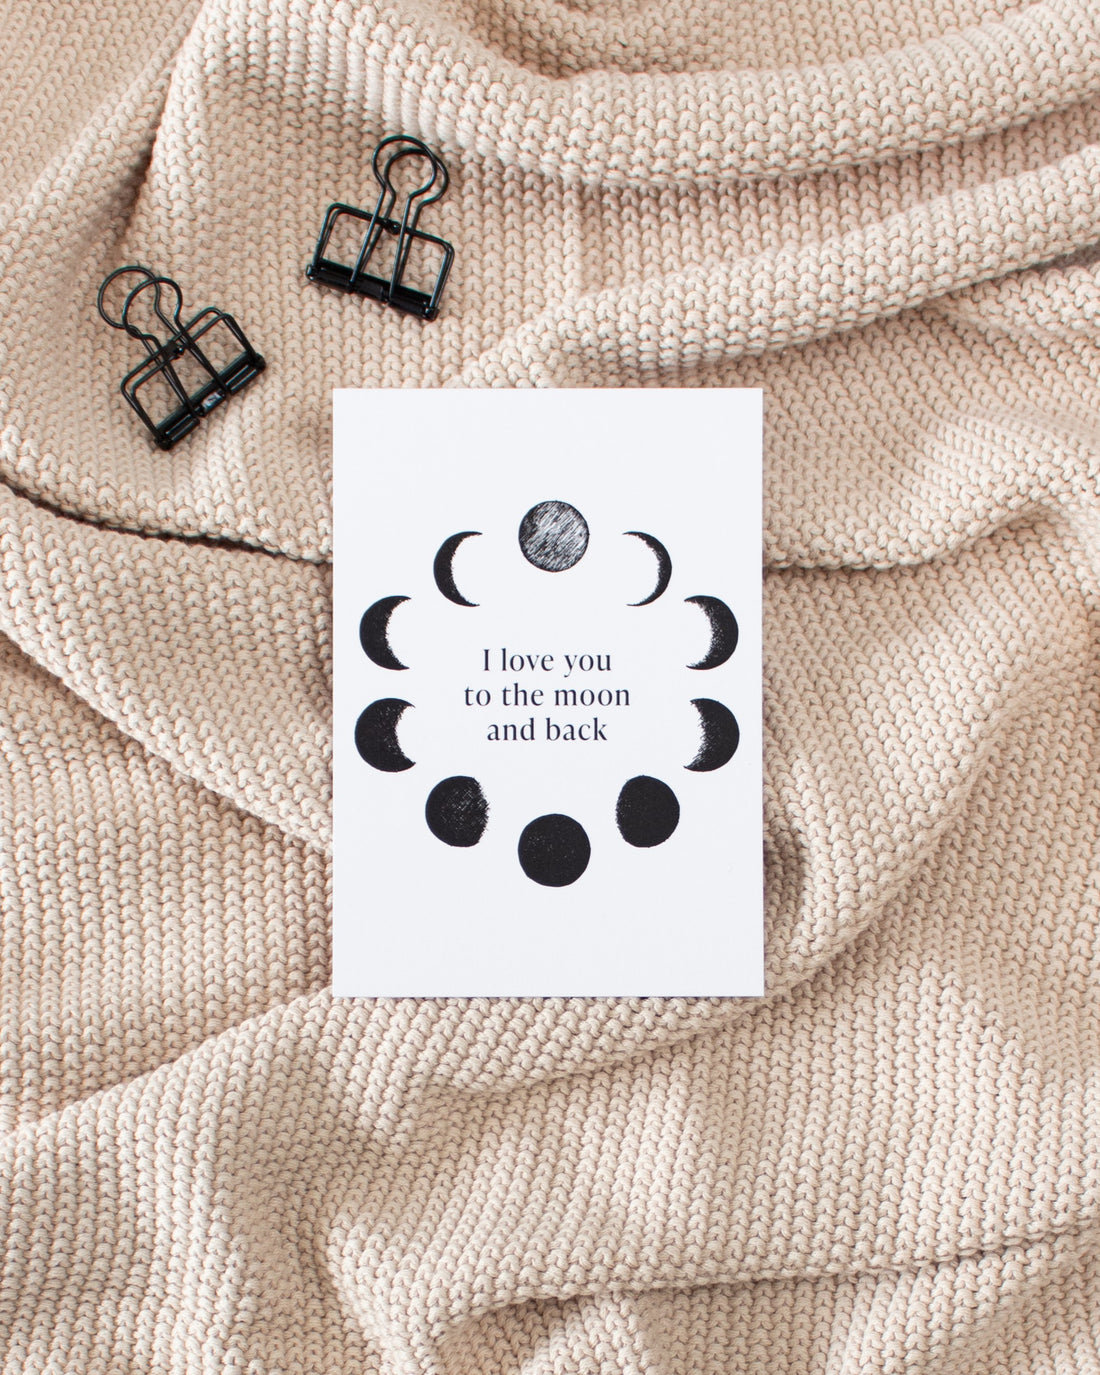 A white postcard laying on a beige knitted blanket with some black binder clips. The postcard design shows black sketches of moon phases arranged in a circle with some text in the middle saying &quot;I love you to the moon and back&quot;.